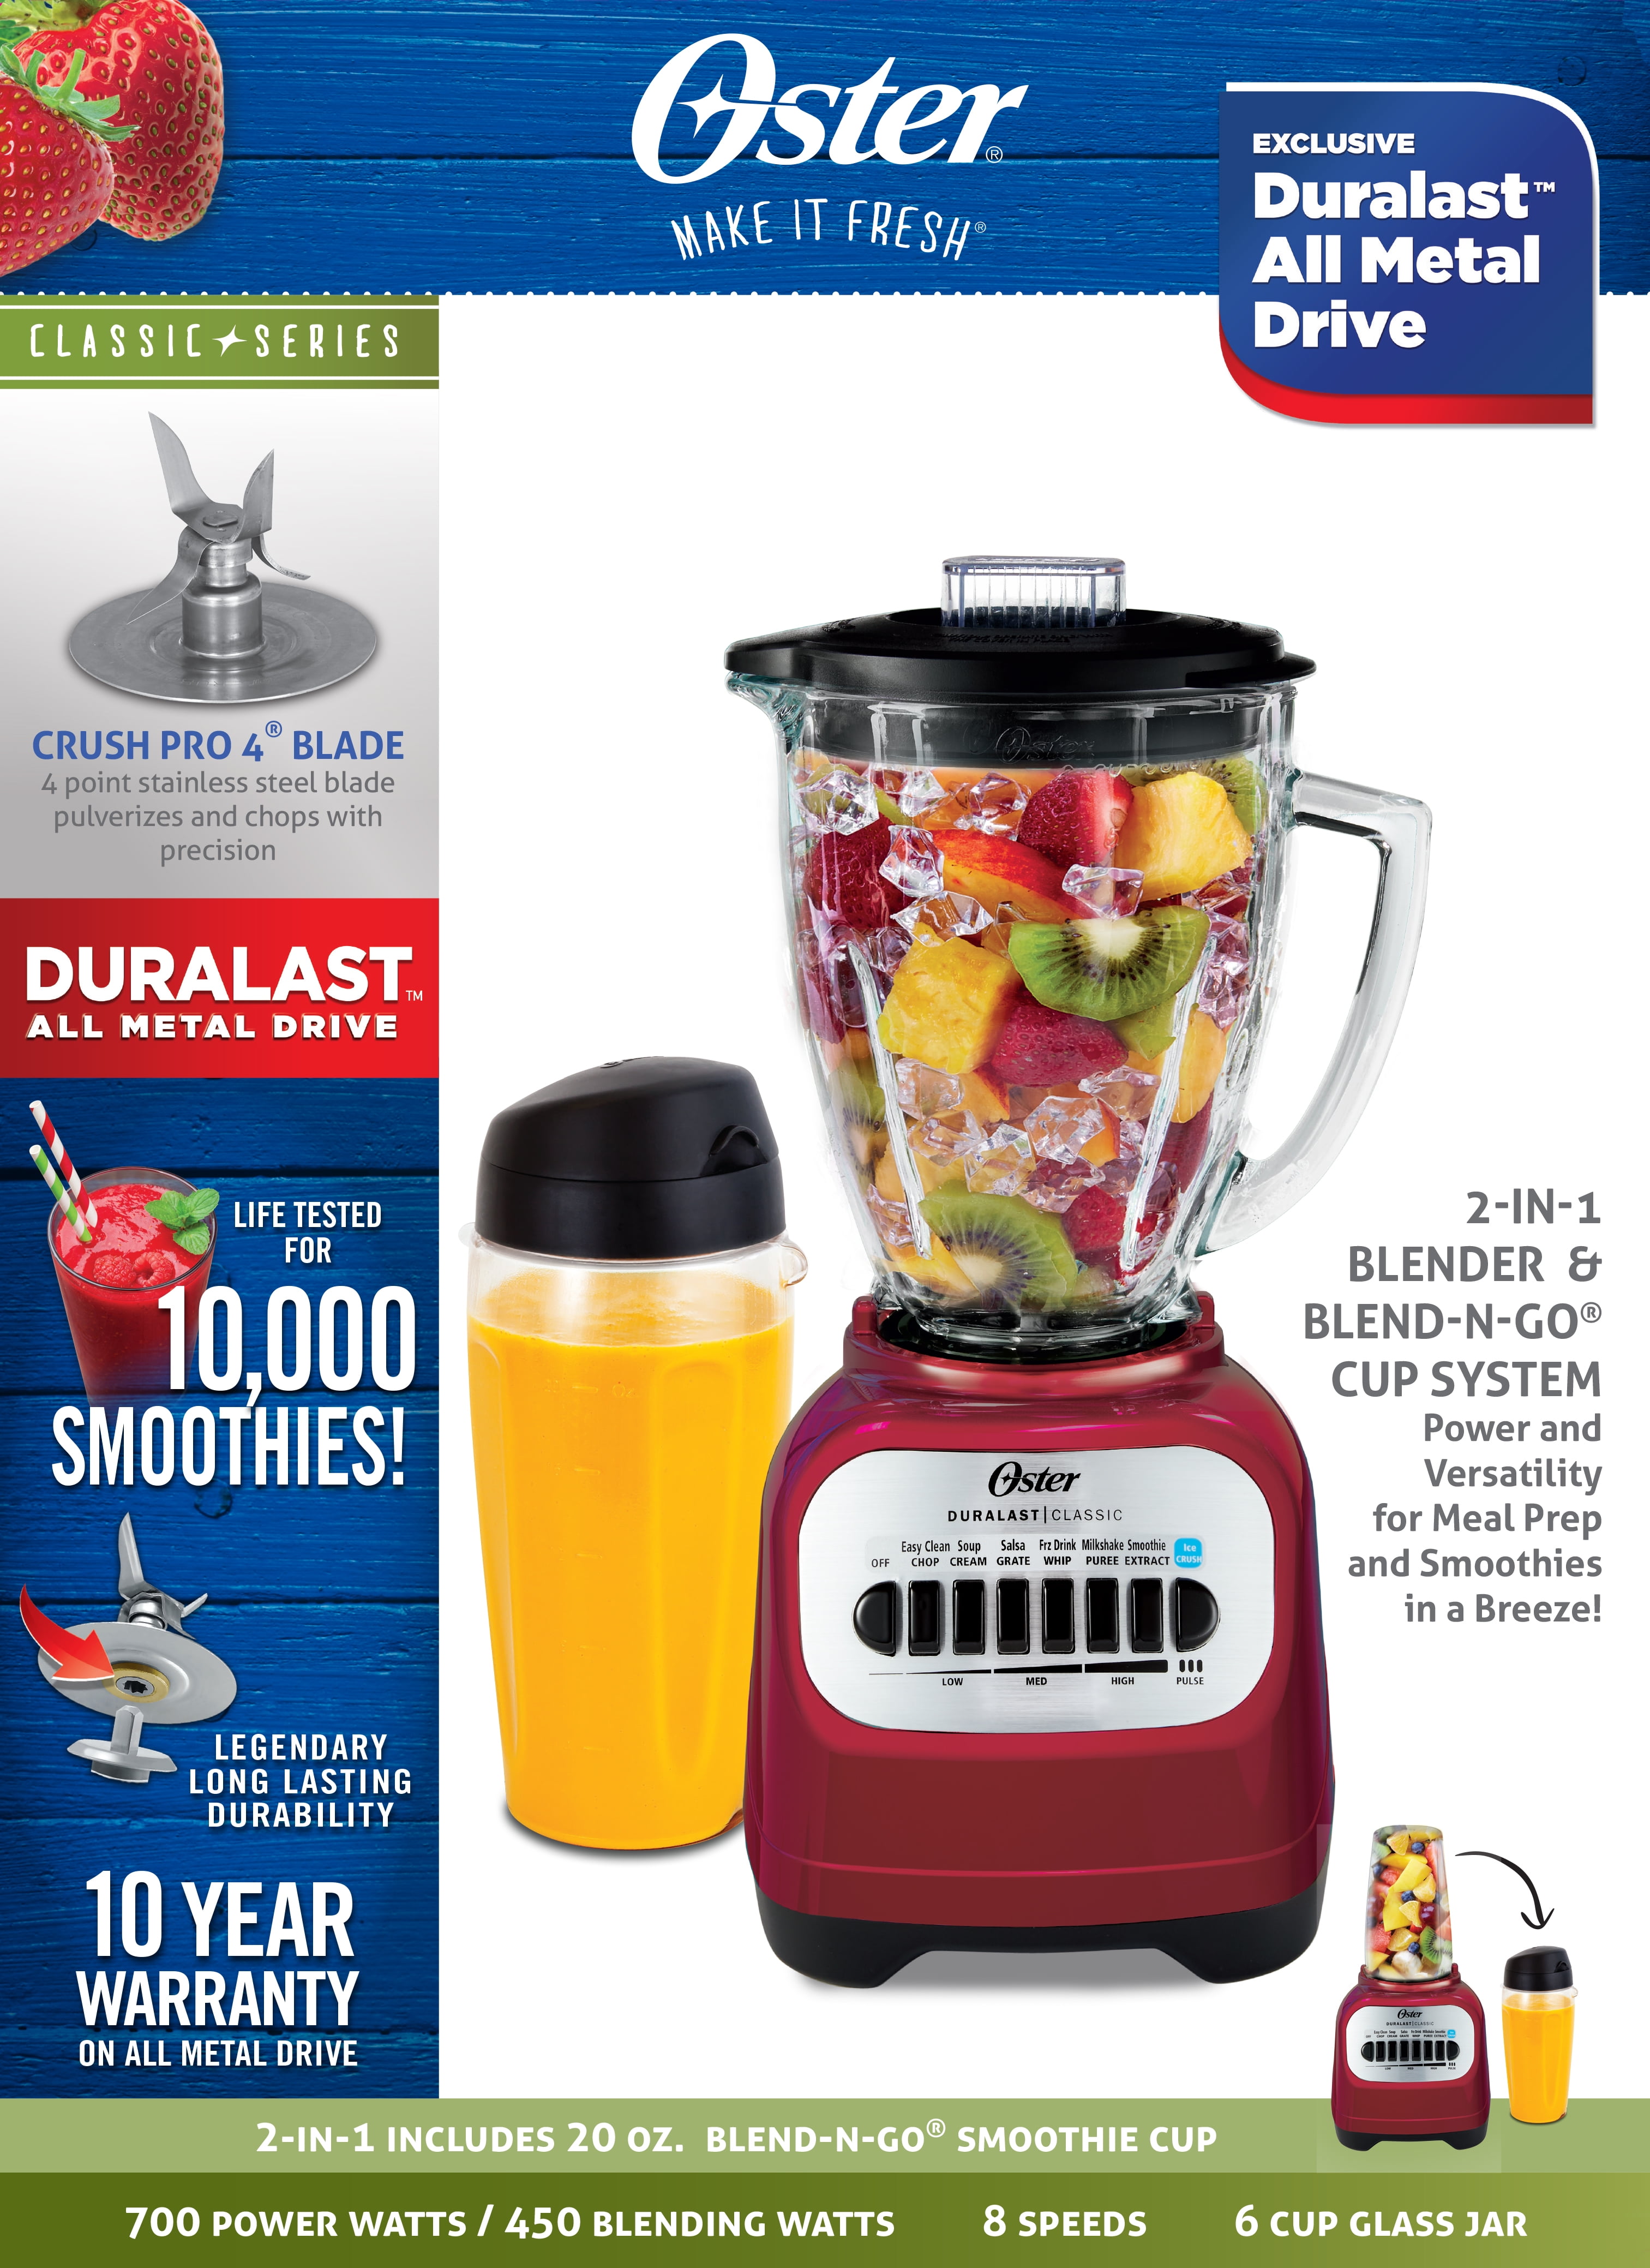 Oster Classic Series 8-Speed Blender with Smoothie Cup - 2